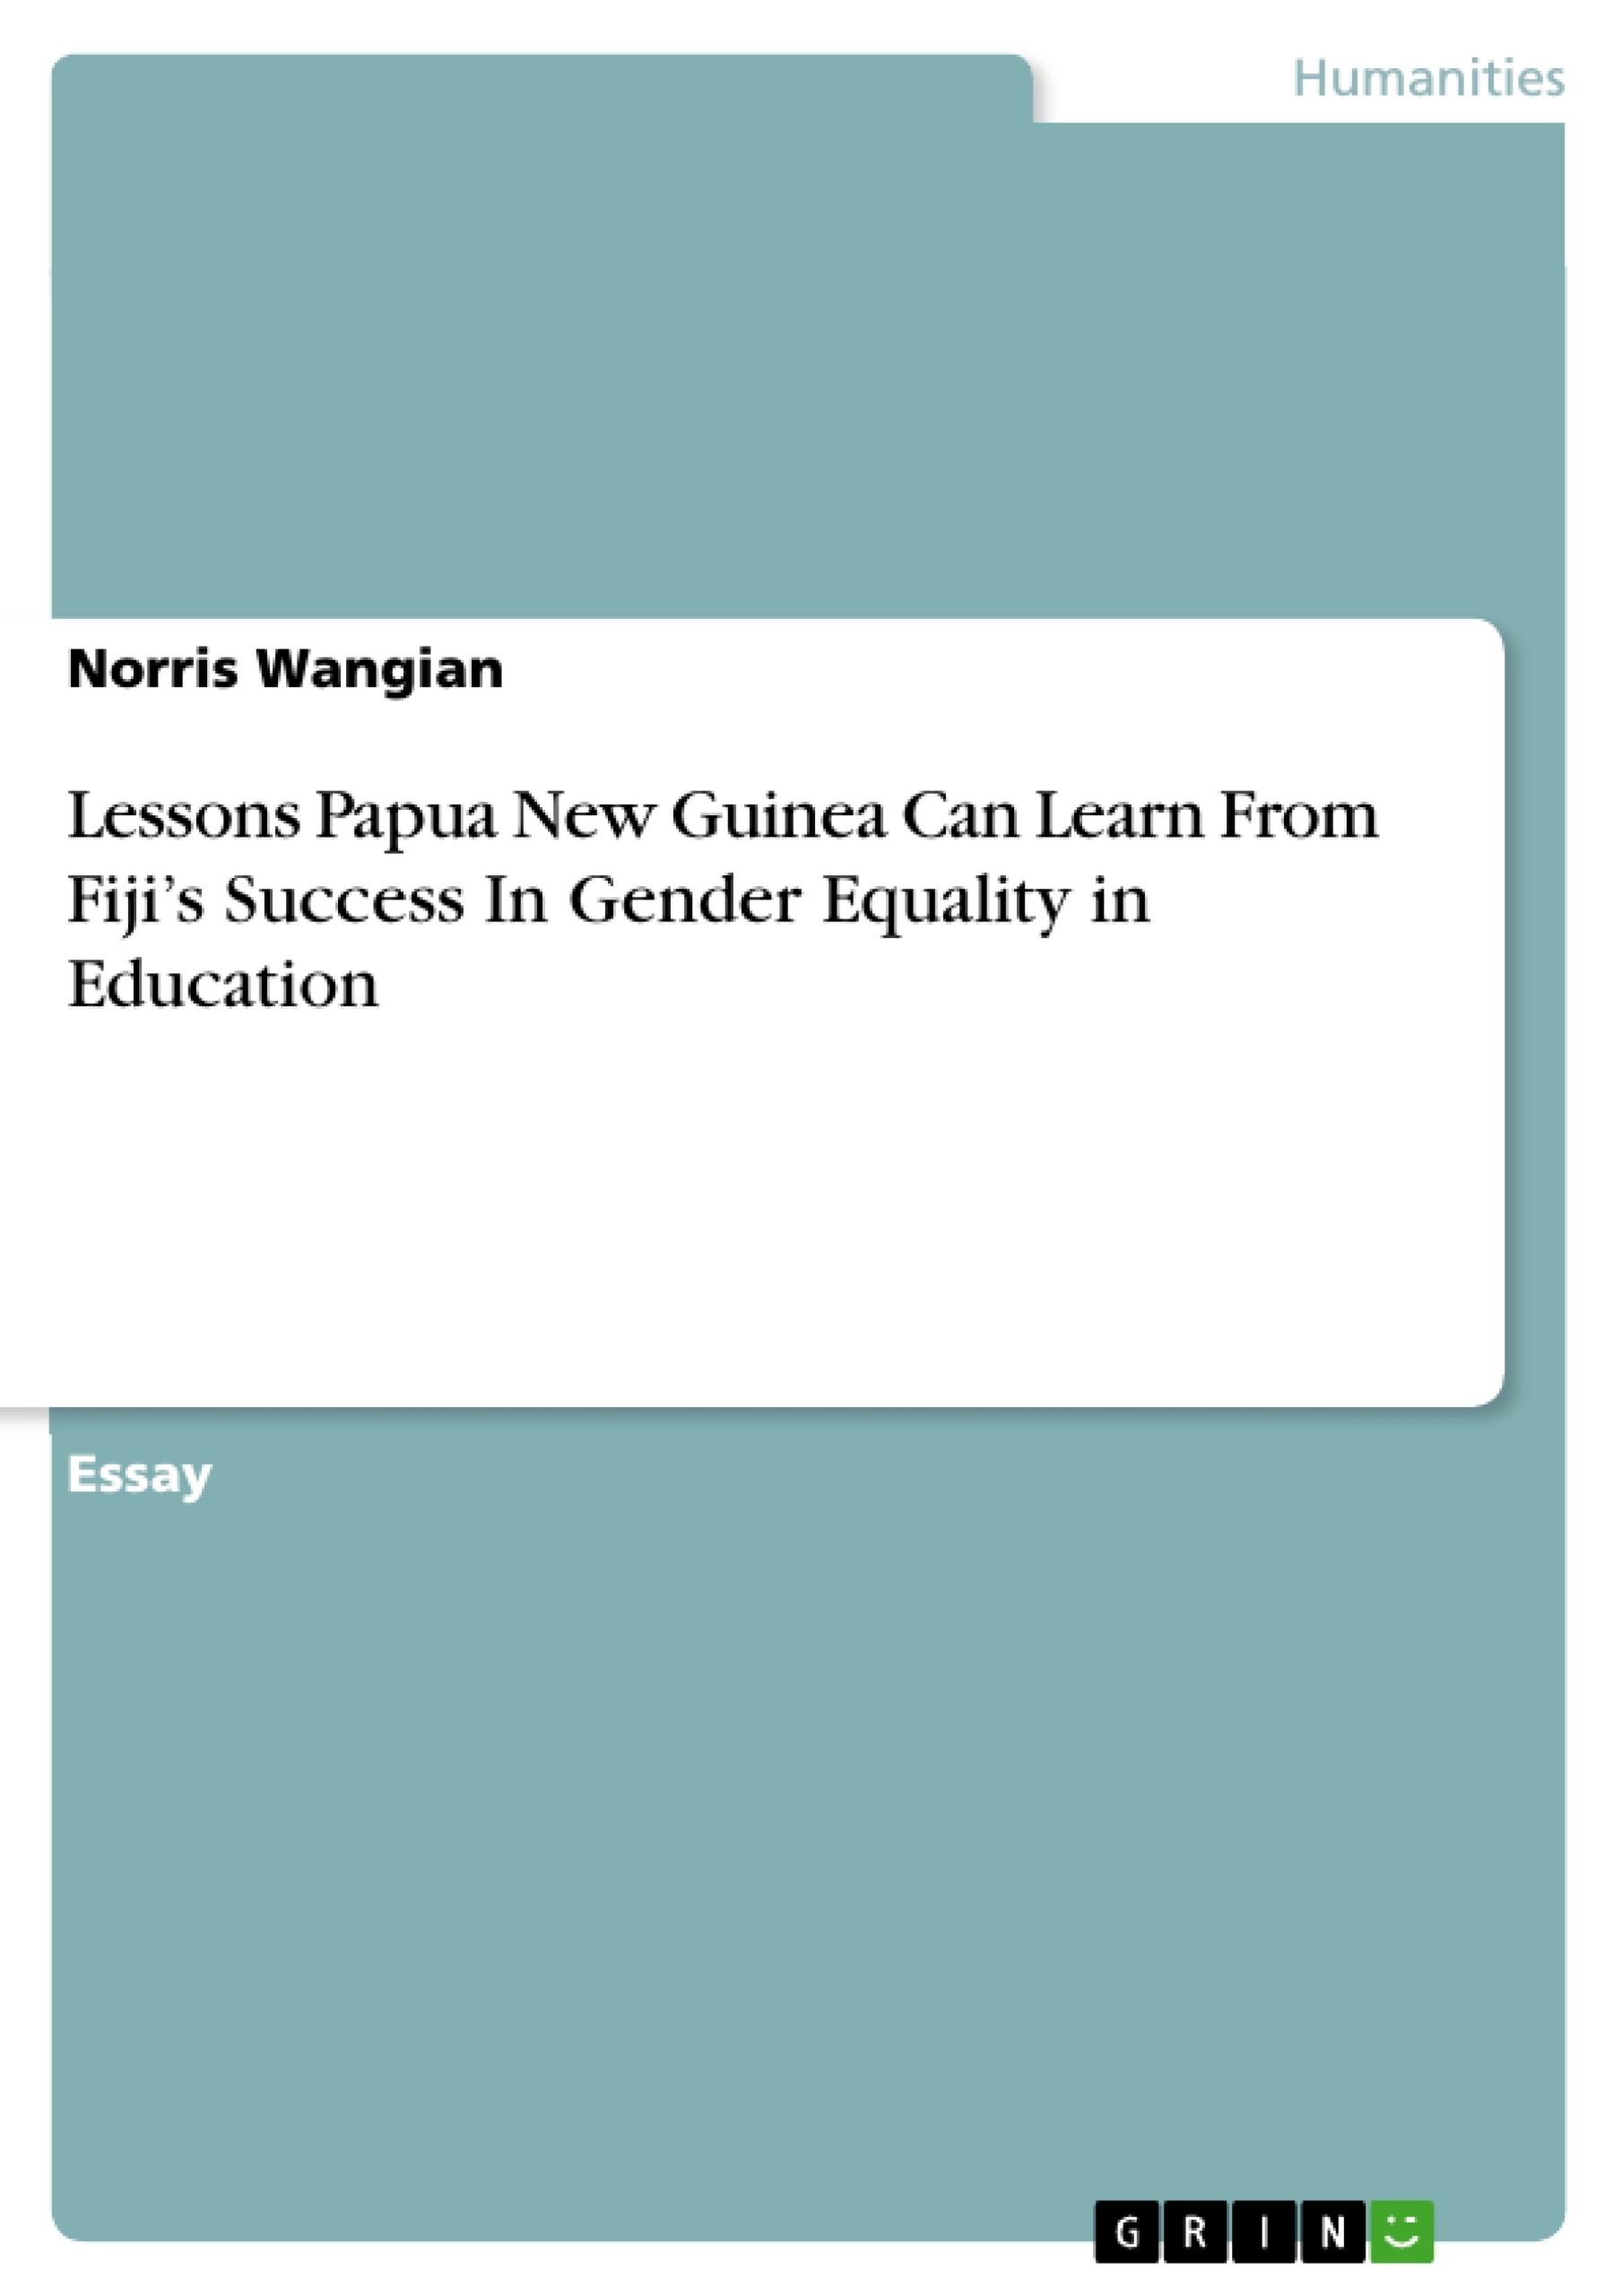 Título: Lessons Papua New Guinea Can Learn From Fiji’s Success In Gender Equality in Education